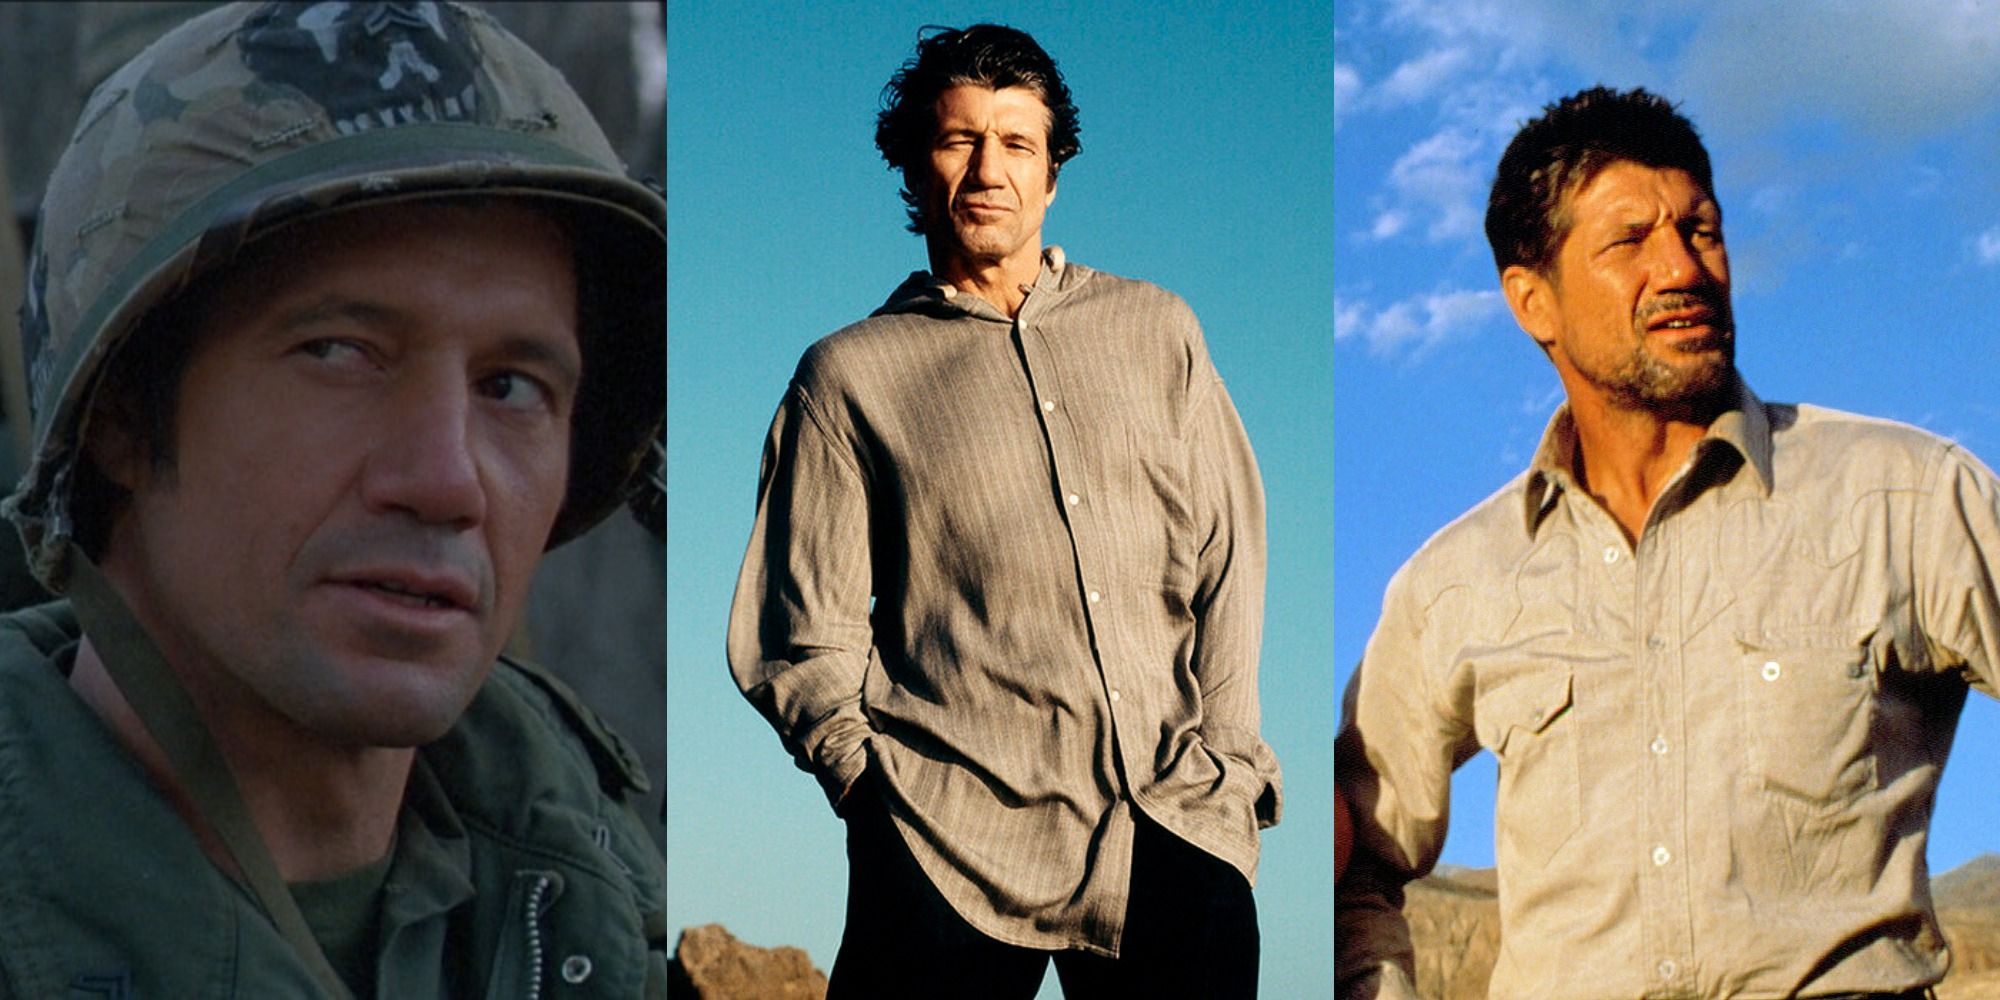 Three images of actor Fred Ward